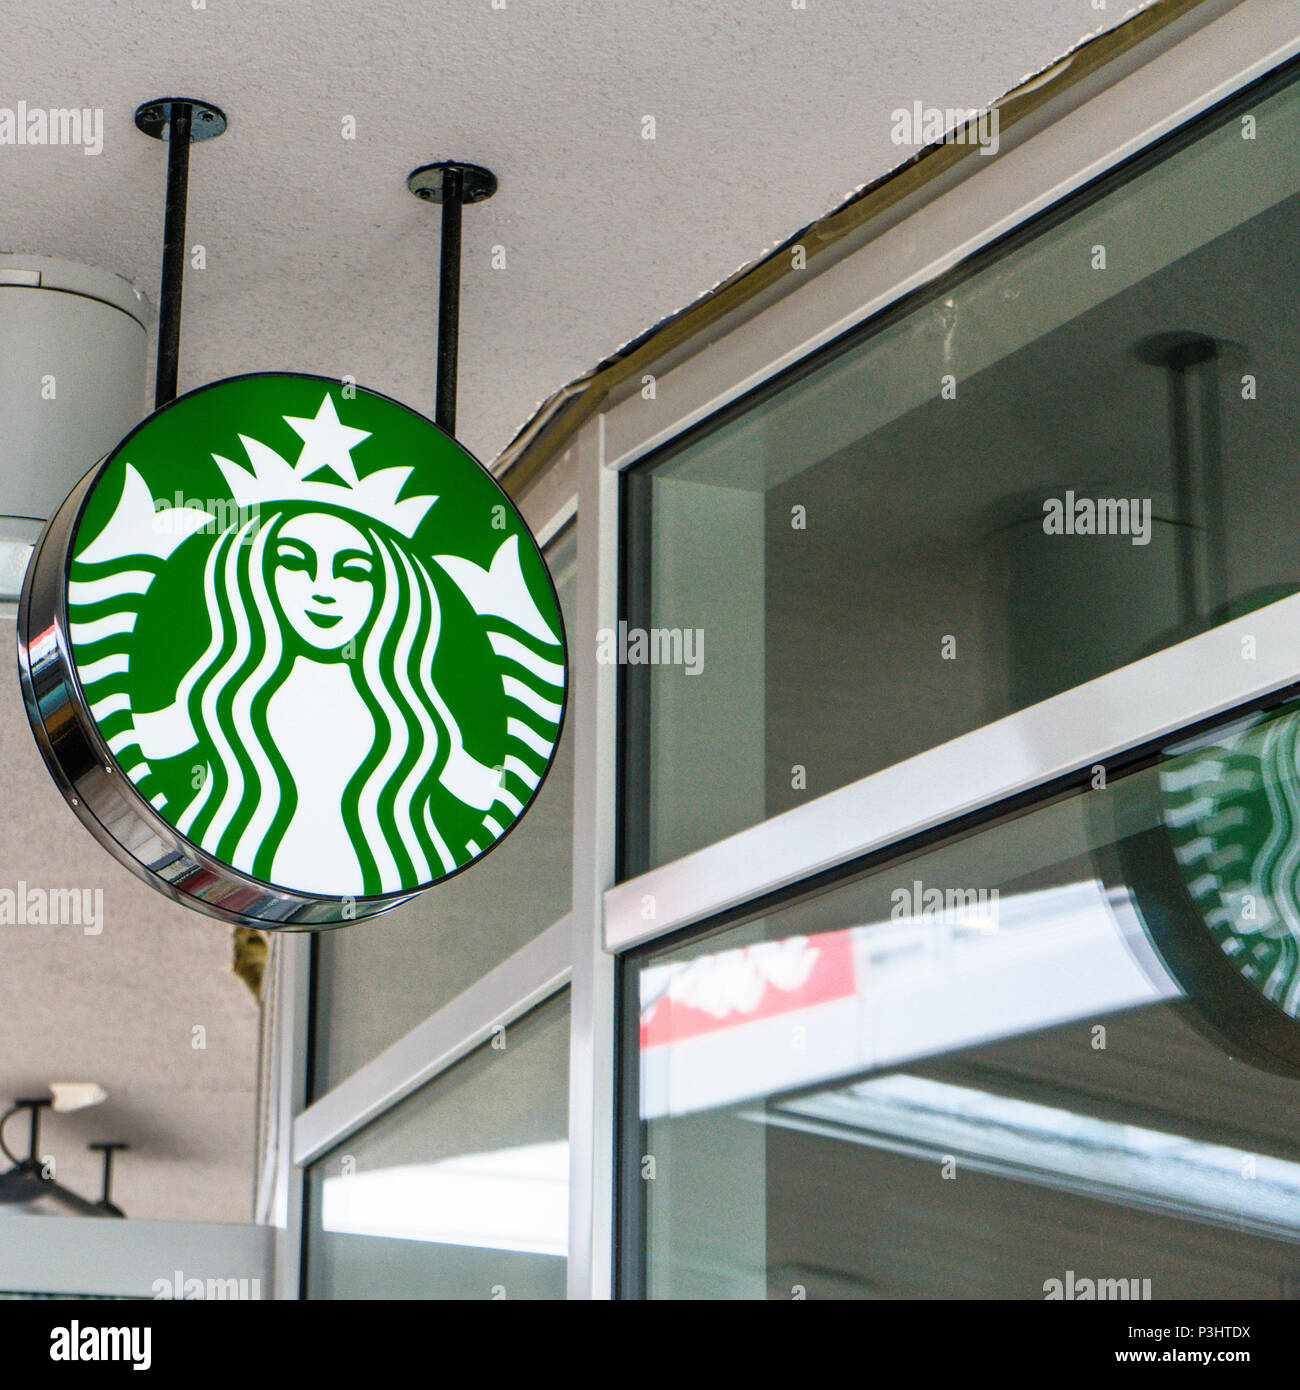 The starbucks logo on the ceiling in front of a store in an outlet in Wolfsburg, Germany, June 15, 2018 Stock Photo